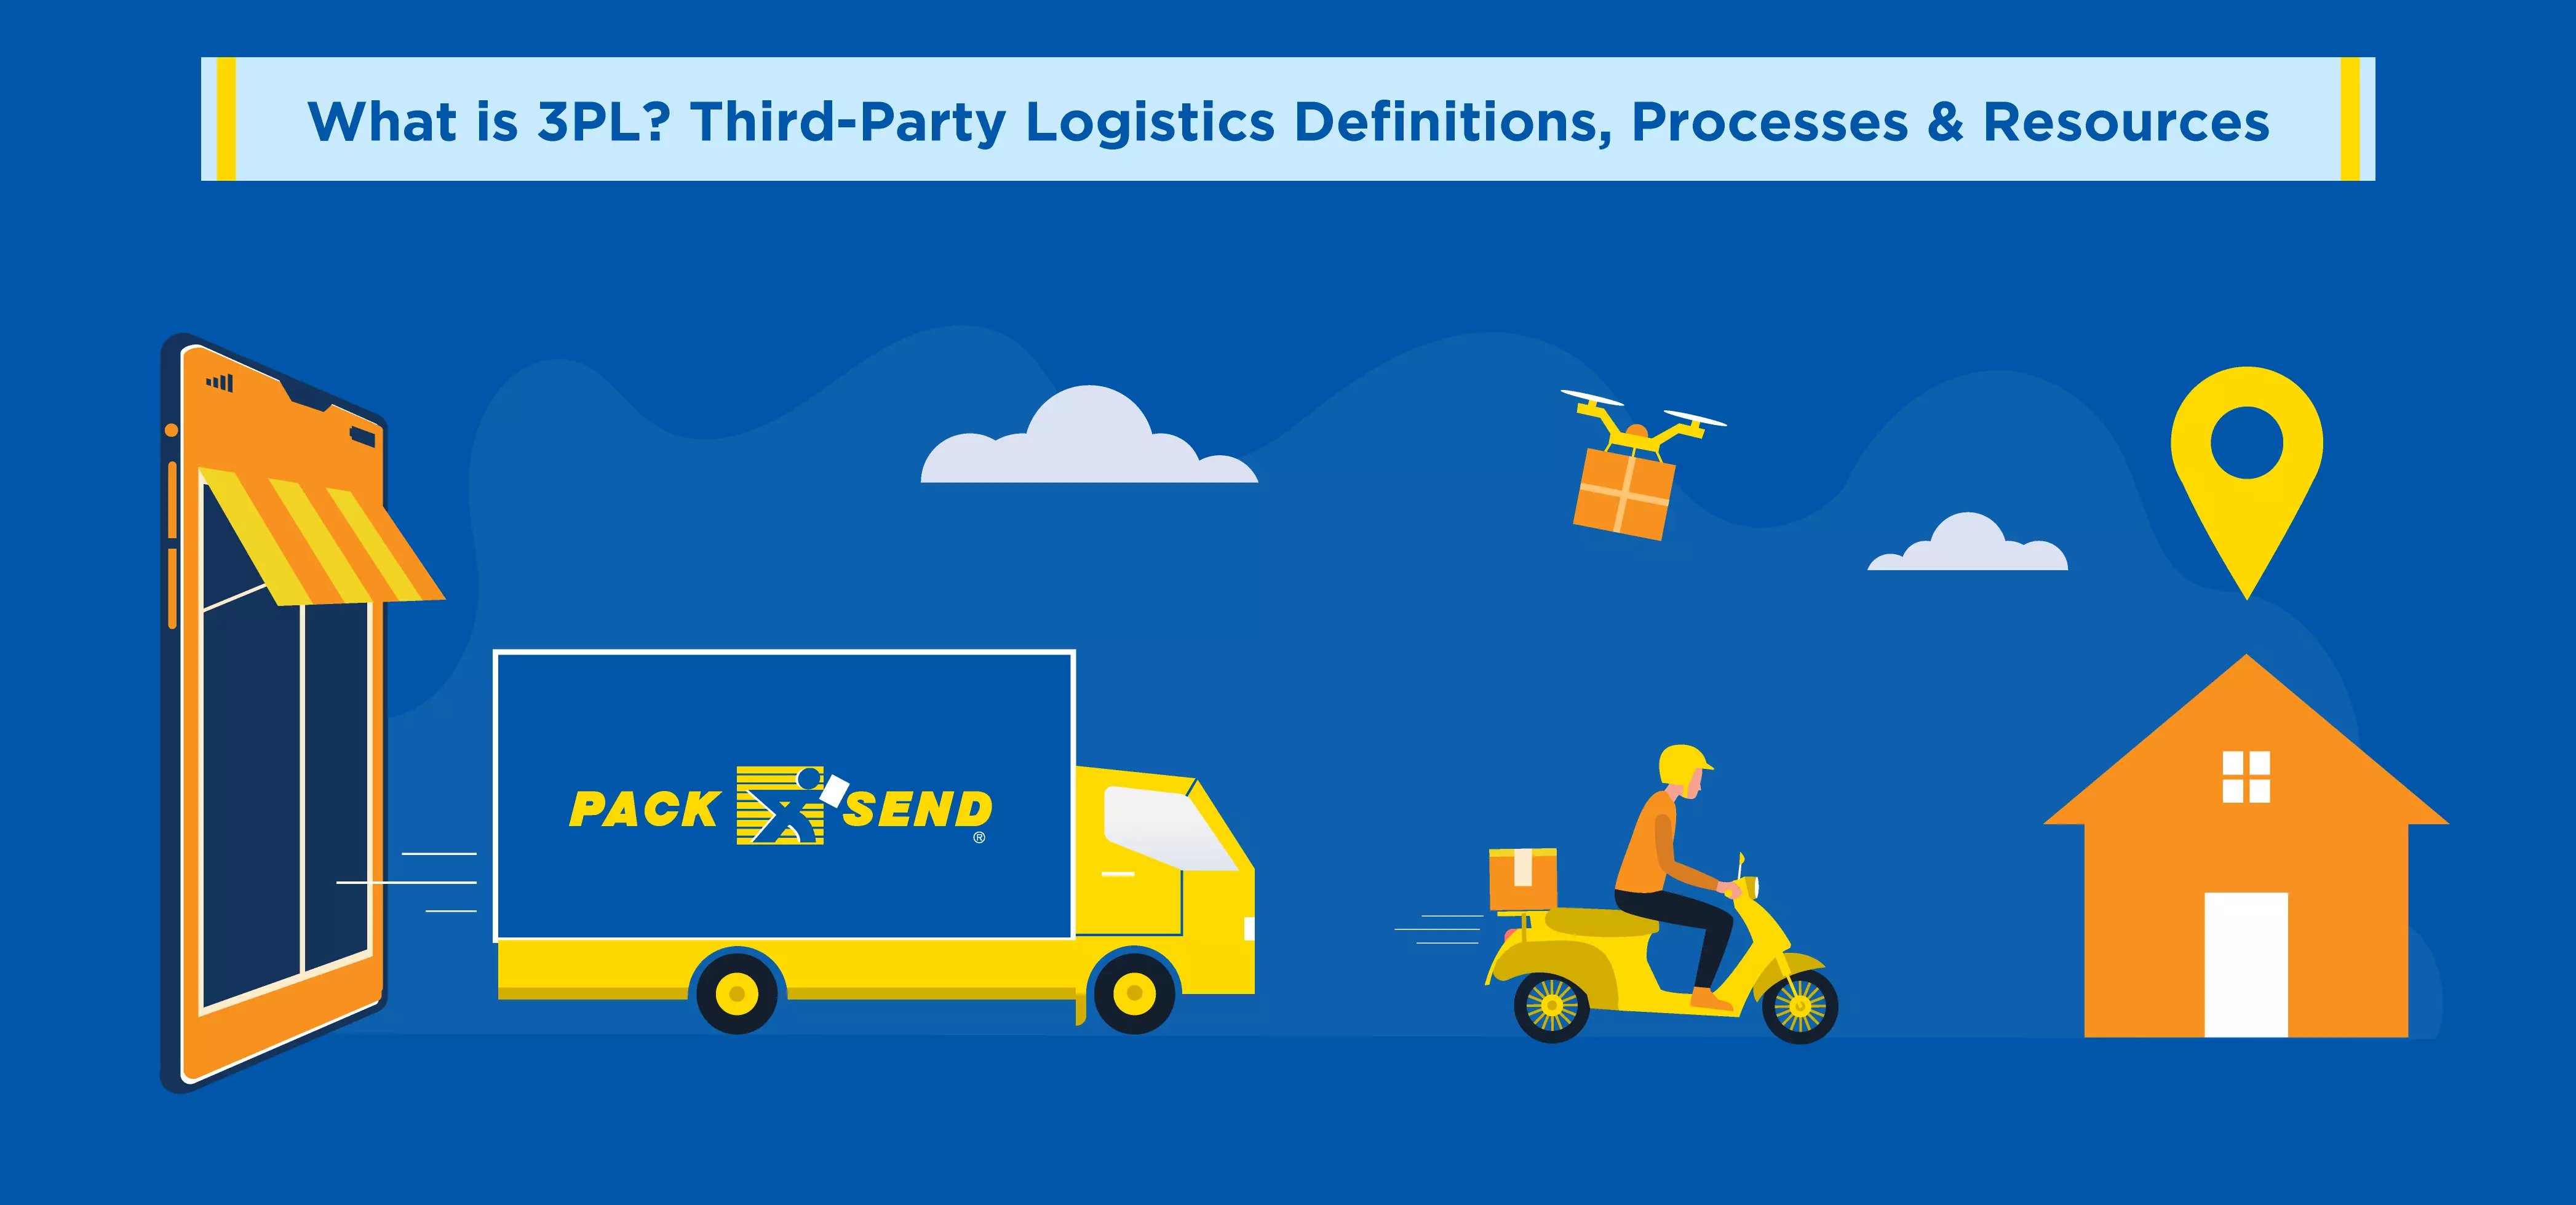 Featured - What is 3PL, Third-Party Logistics Definitions, Processes and Resources